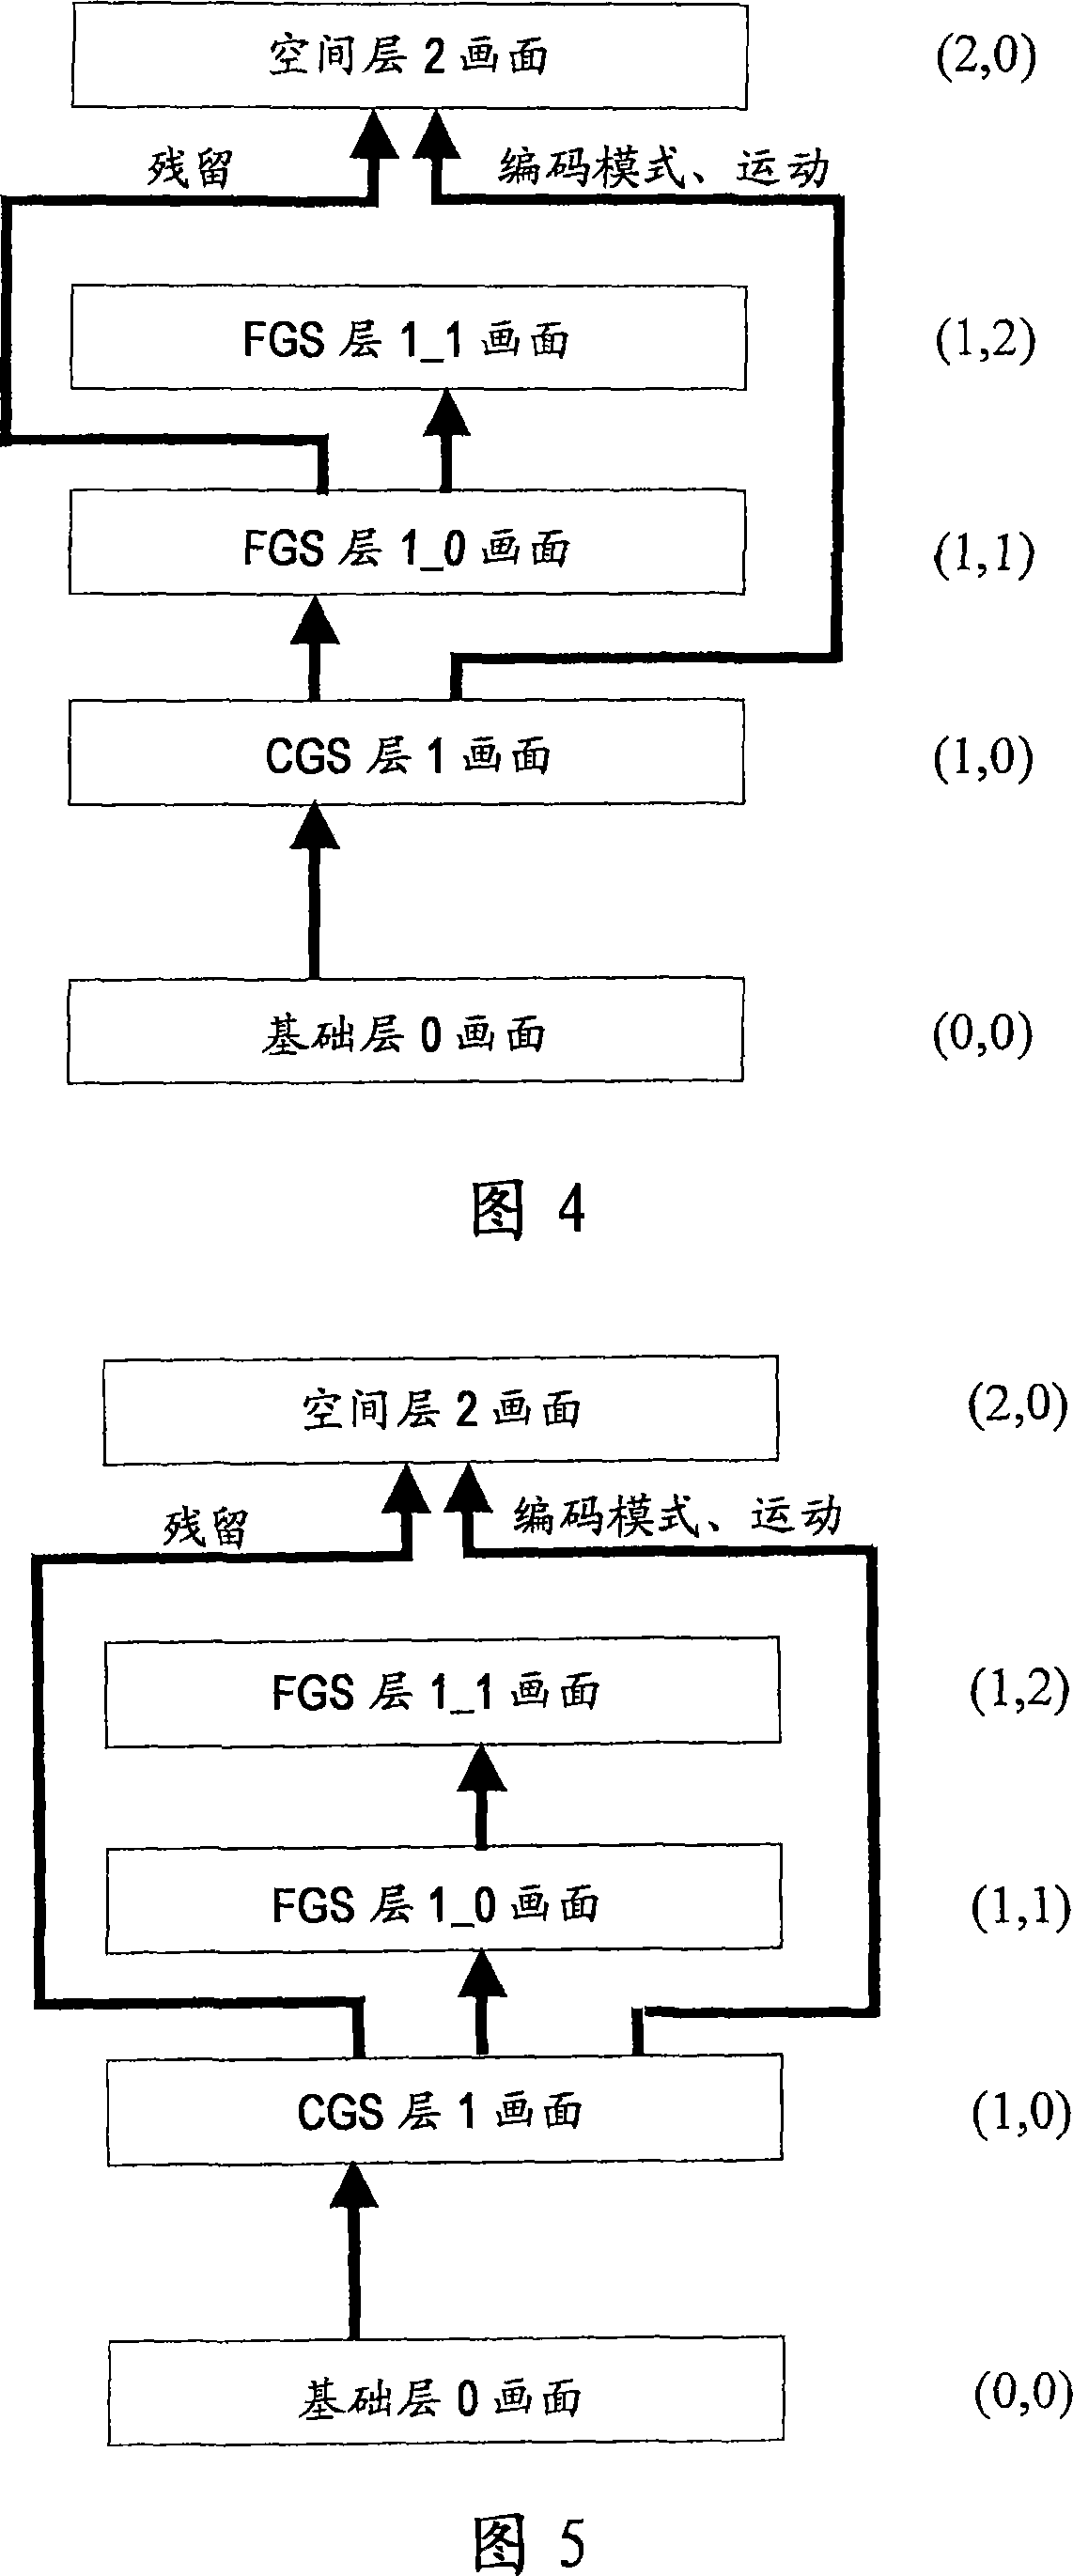 Coding dependency indication in scalable video coding